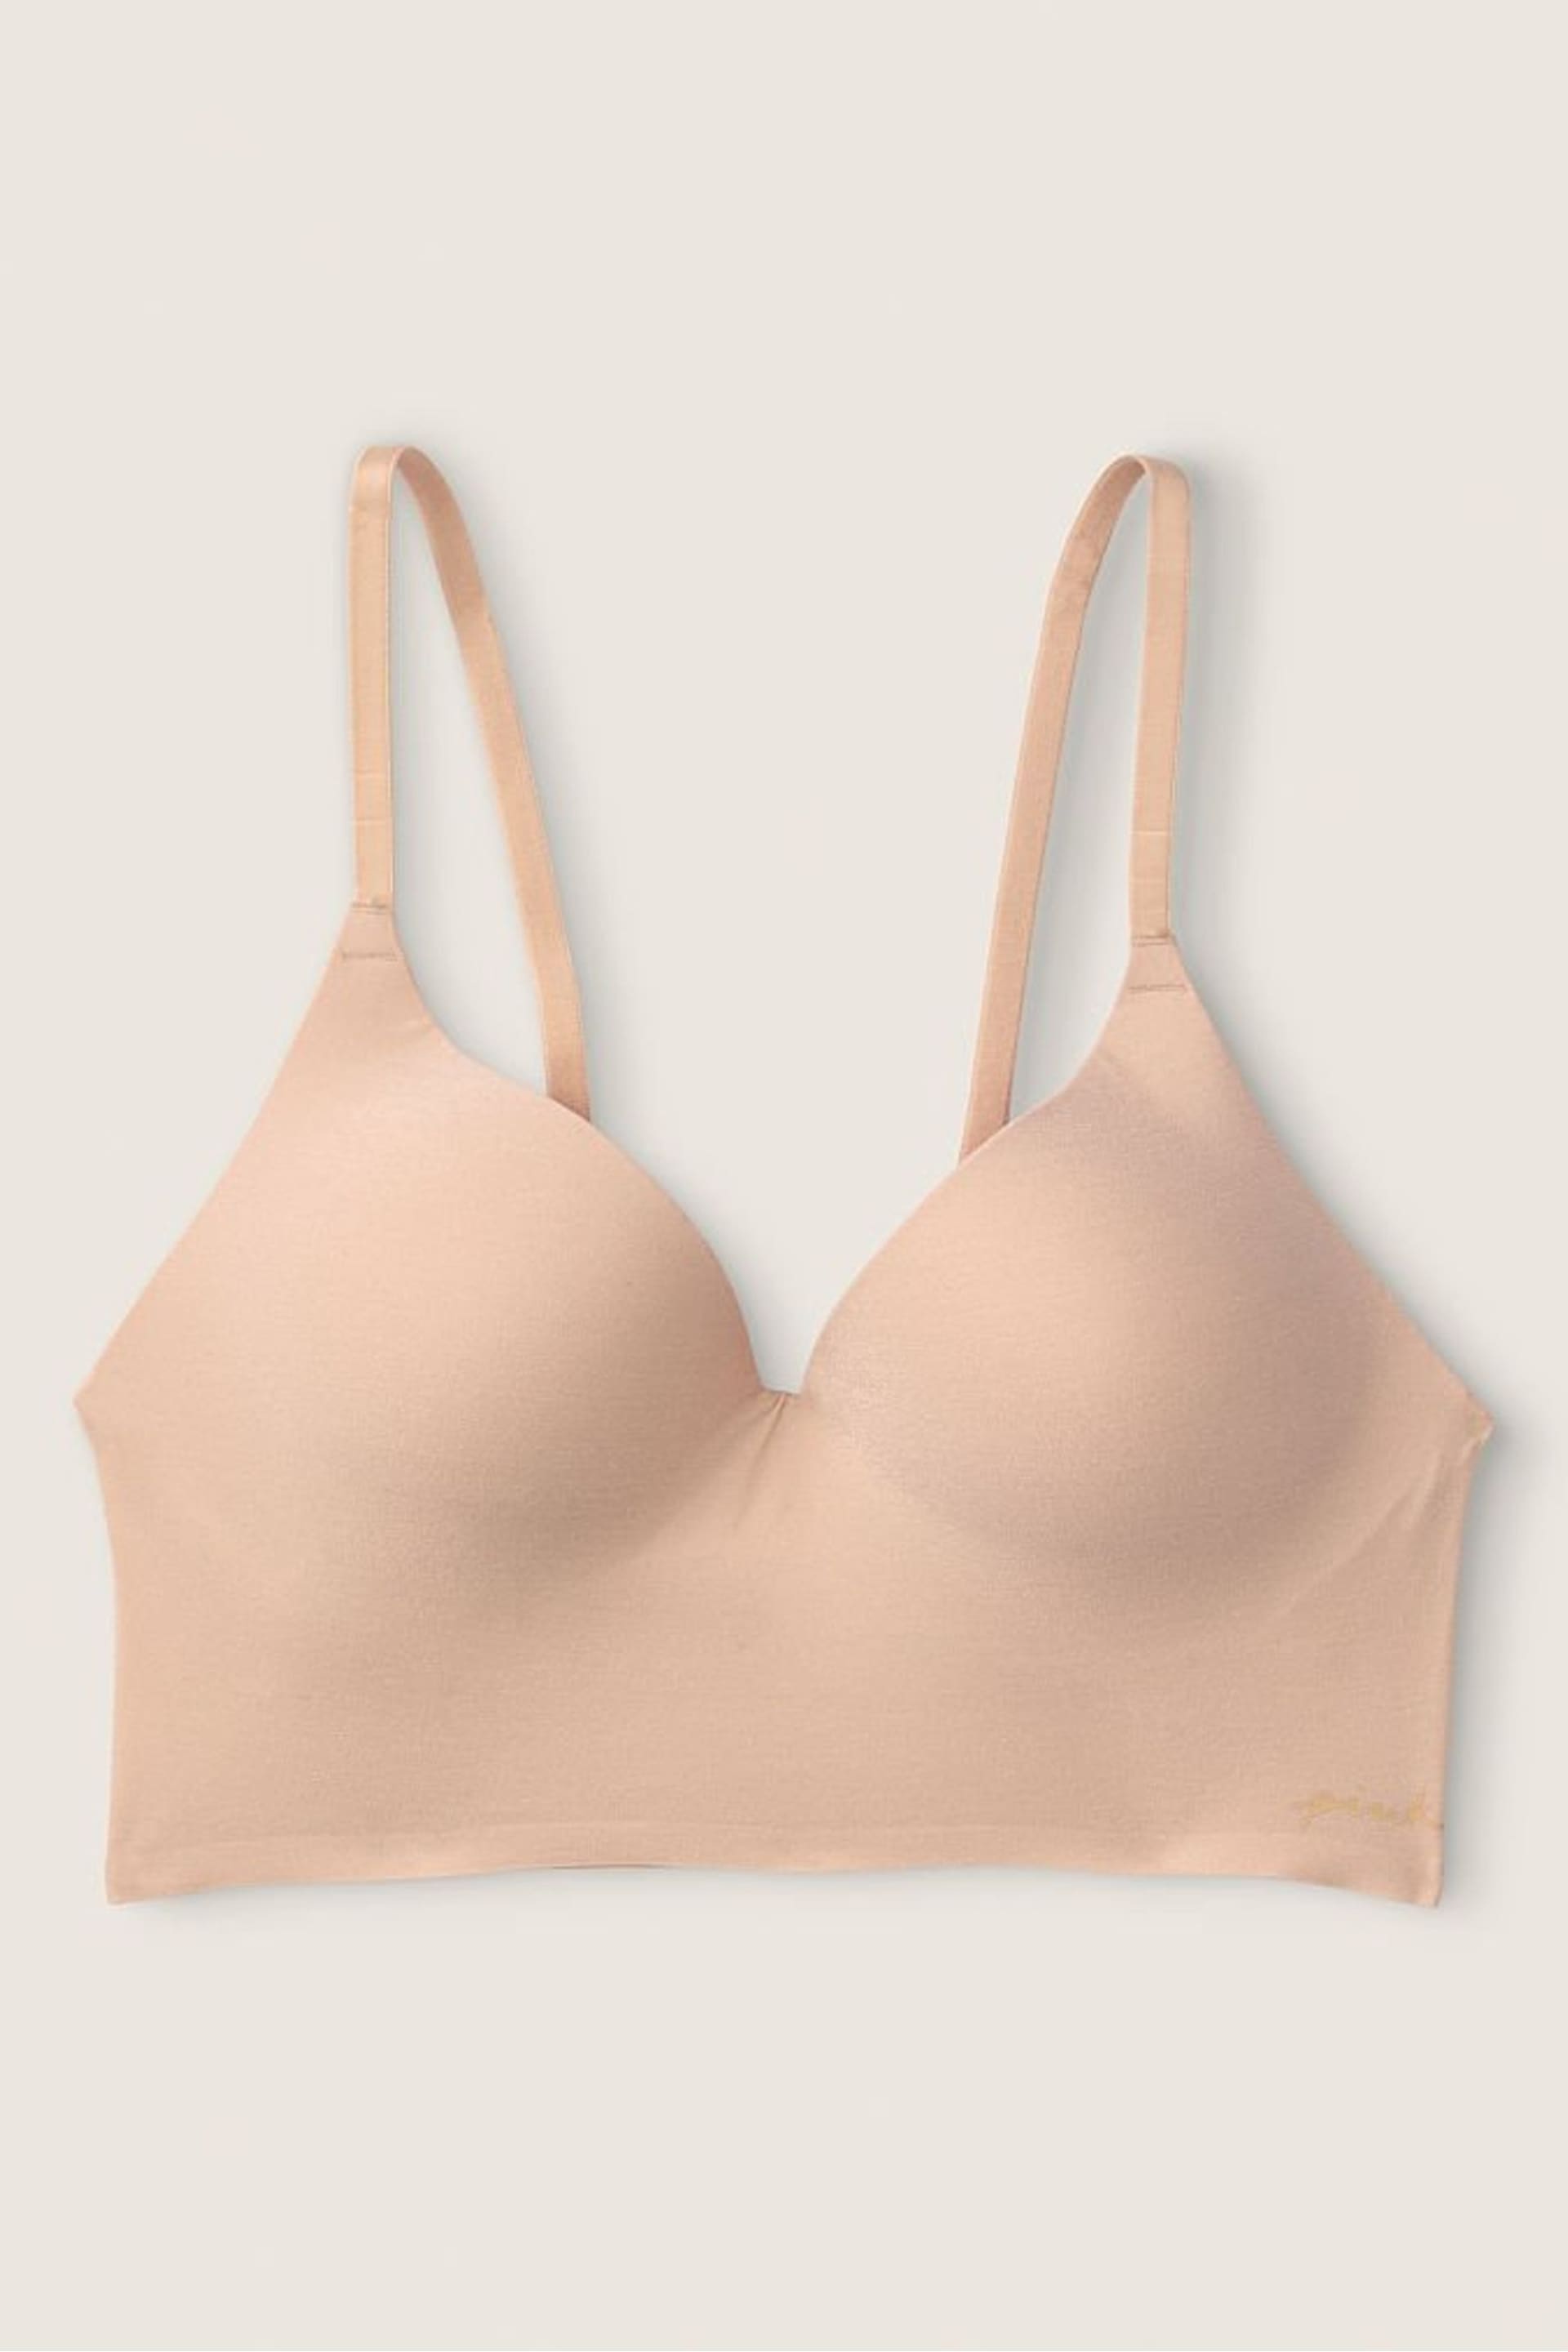 Victoria's Secret PINK Beige Nude Smooth Non Wired Push Up Bralette - Image 1 of 1